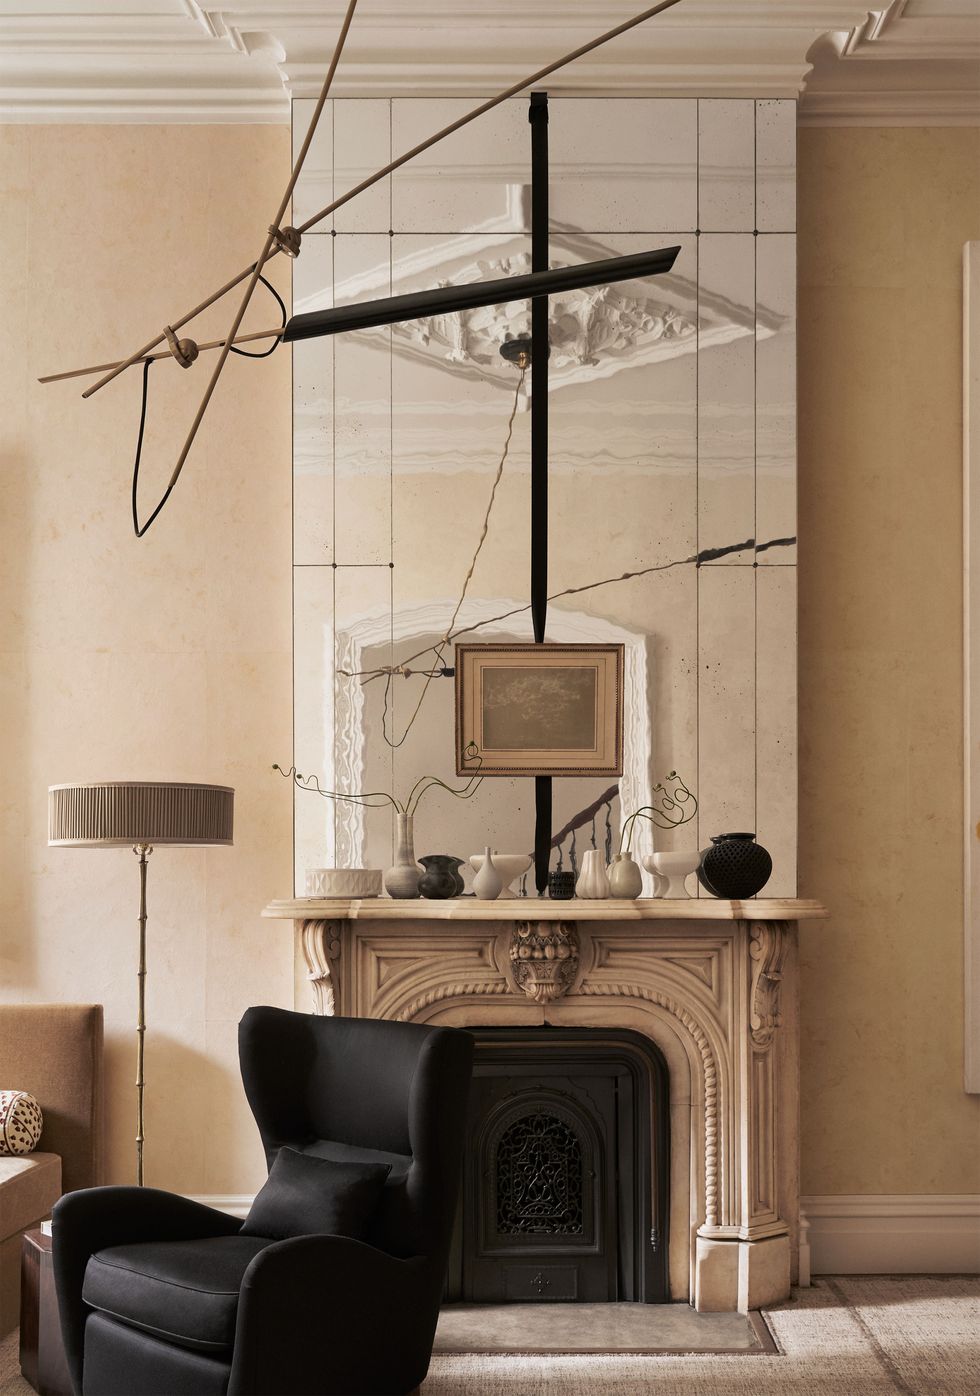 living room of a 1901 building with an fireplace surround and mantel with ceramic vases and a large mirror above it, black wingback chair, floor lamp, black pendant, light ocher walls, neutral carpet